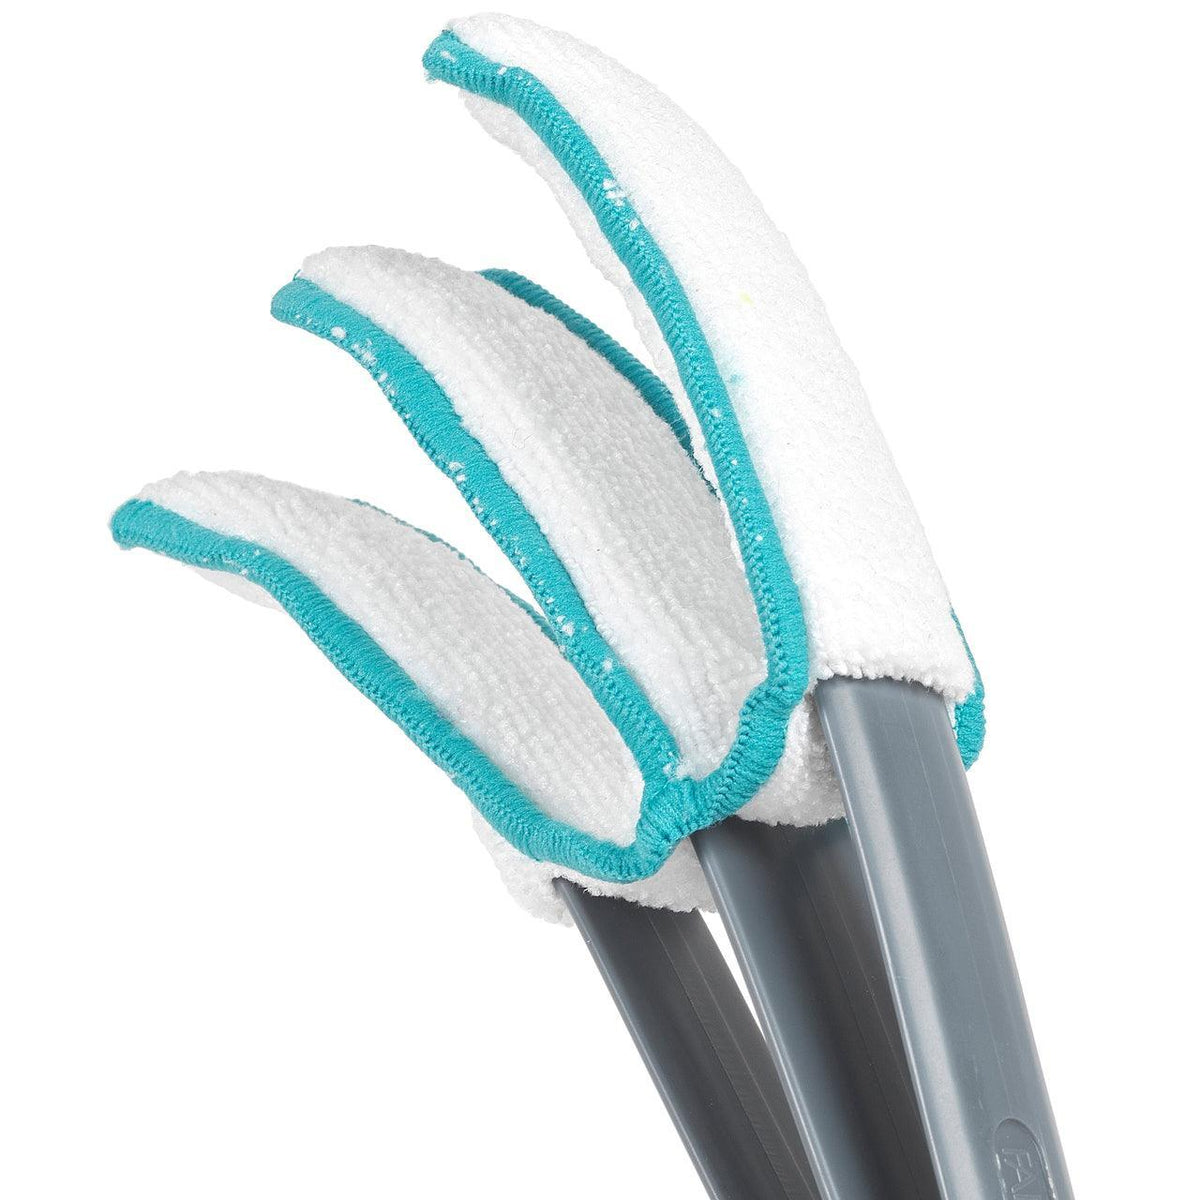 Beldray Microfibre 2 In 1 Blind Cleaner | Two Replacement Cleaning Pads | Turquoise/Grey - Choice Stores